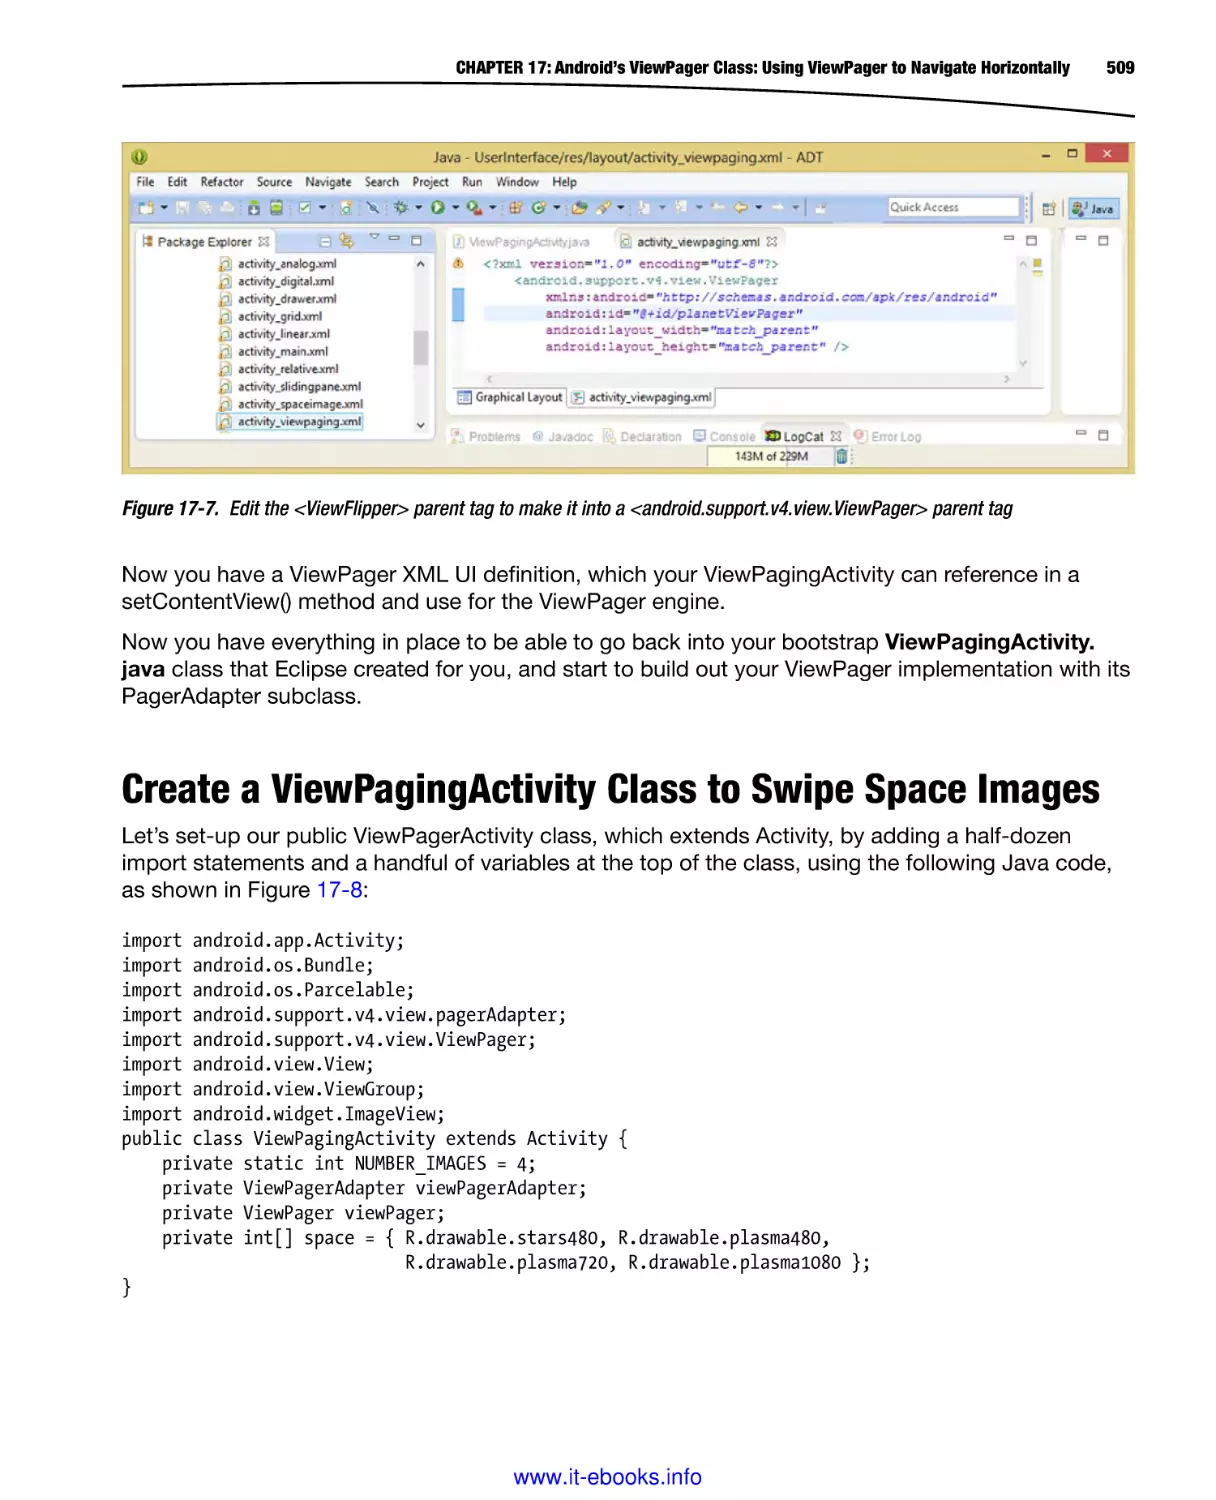 Create a ViewPagingActivity Class to Swipe Space Images